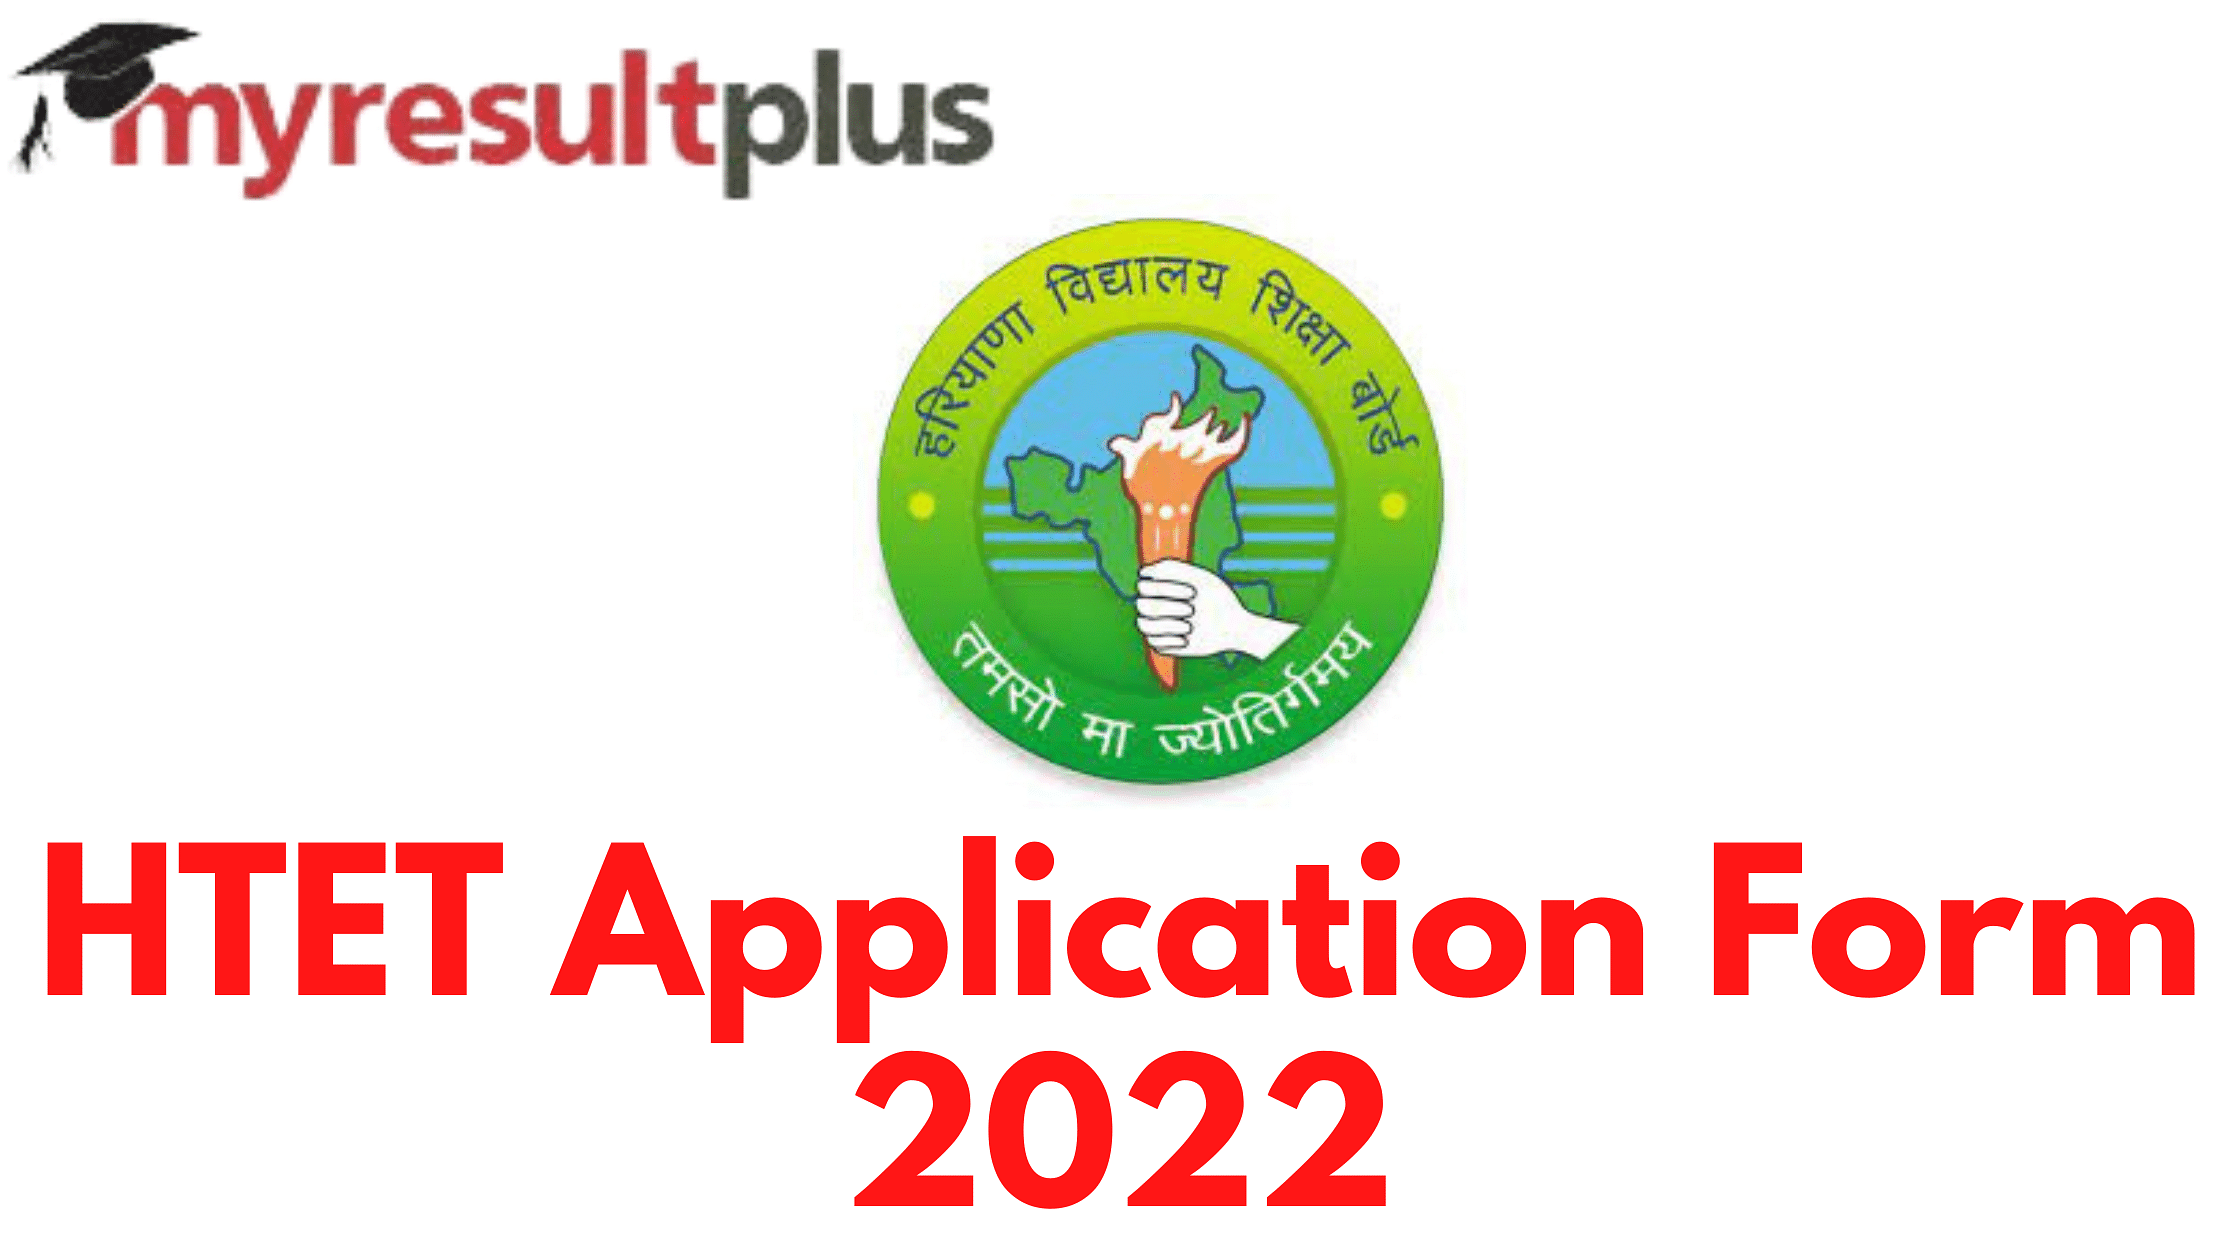 HTET 2022 Application Process Ends Today, Steps to Apply Here